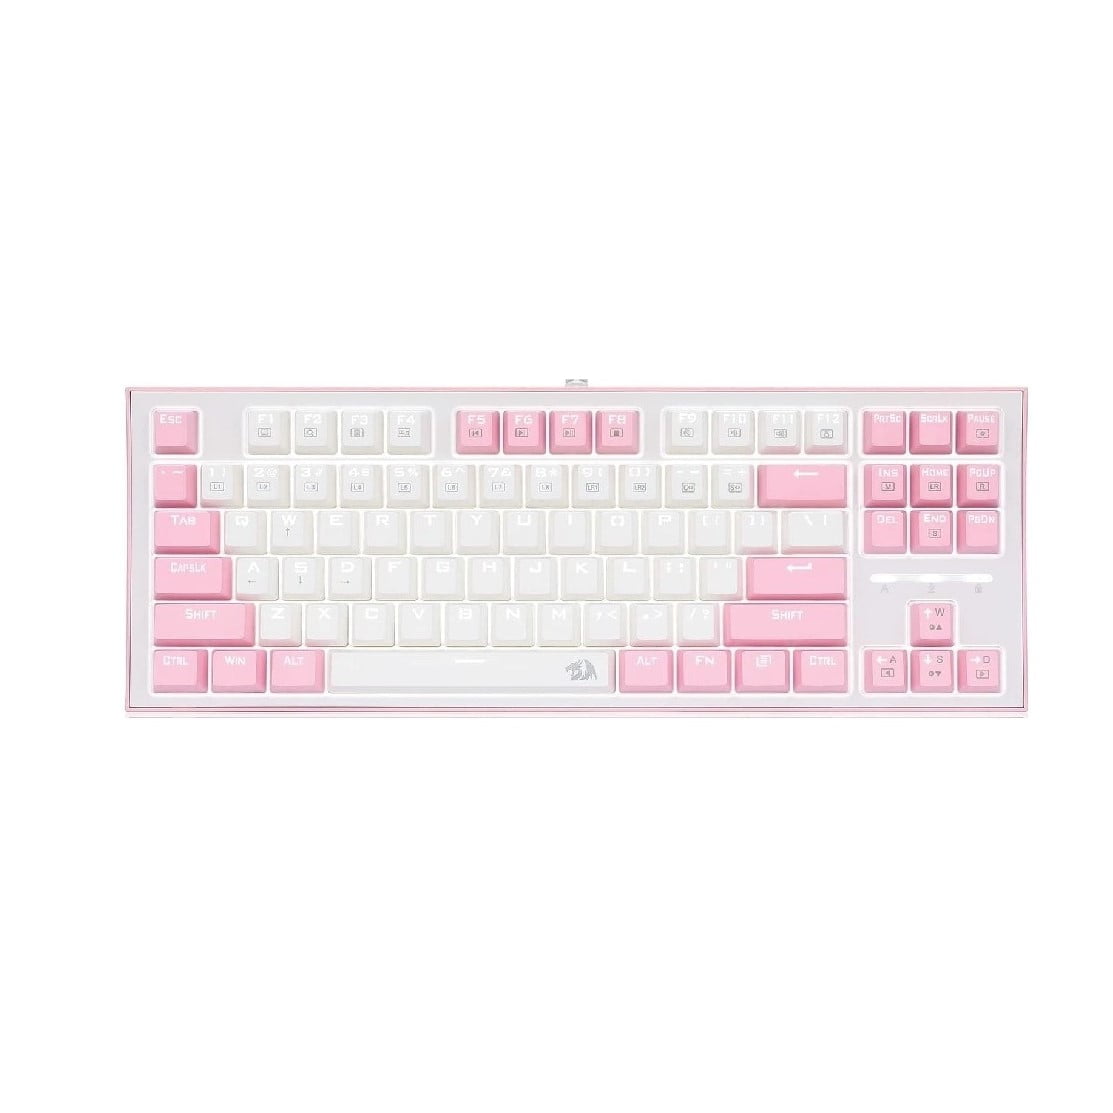 Dae4Ca8C3B83Fad2314A0707F18B1D26 Hi Redragon &Lt;H1 Class=&Quot;Product-Single__Title&Quot;&Gt;Redragon K611 Dual Color Wired Mechanical Gaming Keyboard&Lt;/H1&Gt; &Lt;Span Style=&Quot;Font-Size: 16Px;&Quot;&Gt;A High Quality Led Backlit Mechanical Gaming Keyboard Is All You For A Stylized Gaming! The Redragon Bes White Pink Mechanical Gaming Keyboard Comes With A Customized Mechanical Switches. It Has Rainbow Backlit Keys And 4 Side Light Effects Which Provide Dazzling Magical Luminous Lighting Effect.&Lt;/Span&Gt; Gaming Keyboard Redragon K611 Dual Color Wired Mechanical Gaming Keyboard